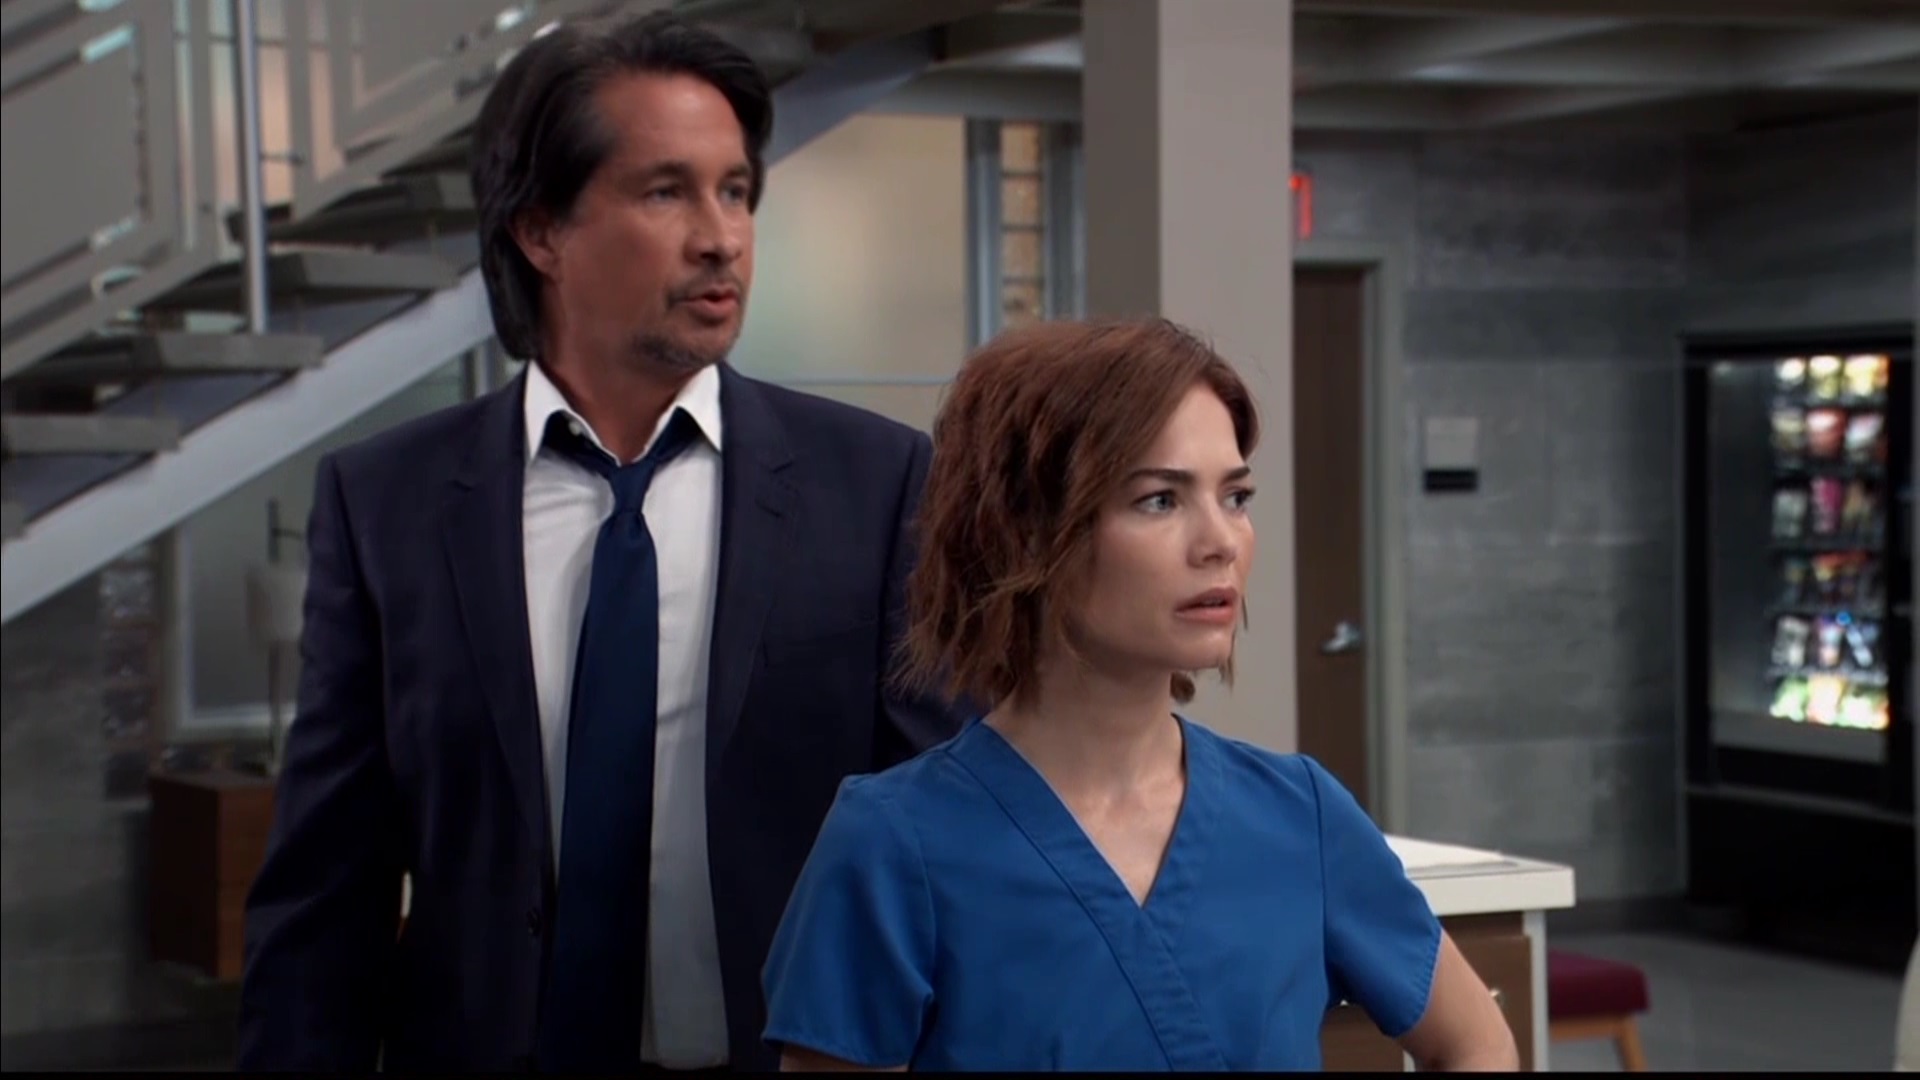 liz watches drama unfold for others general hospital abc